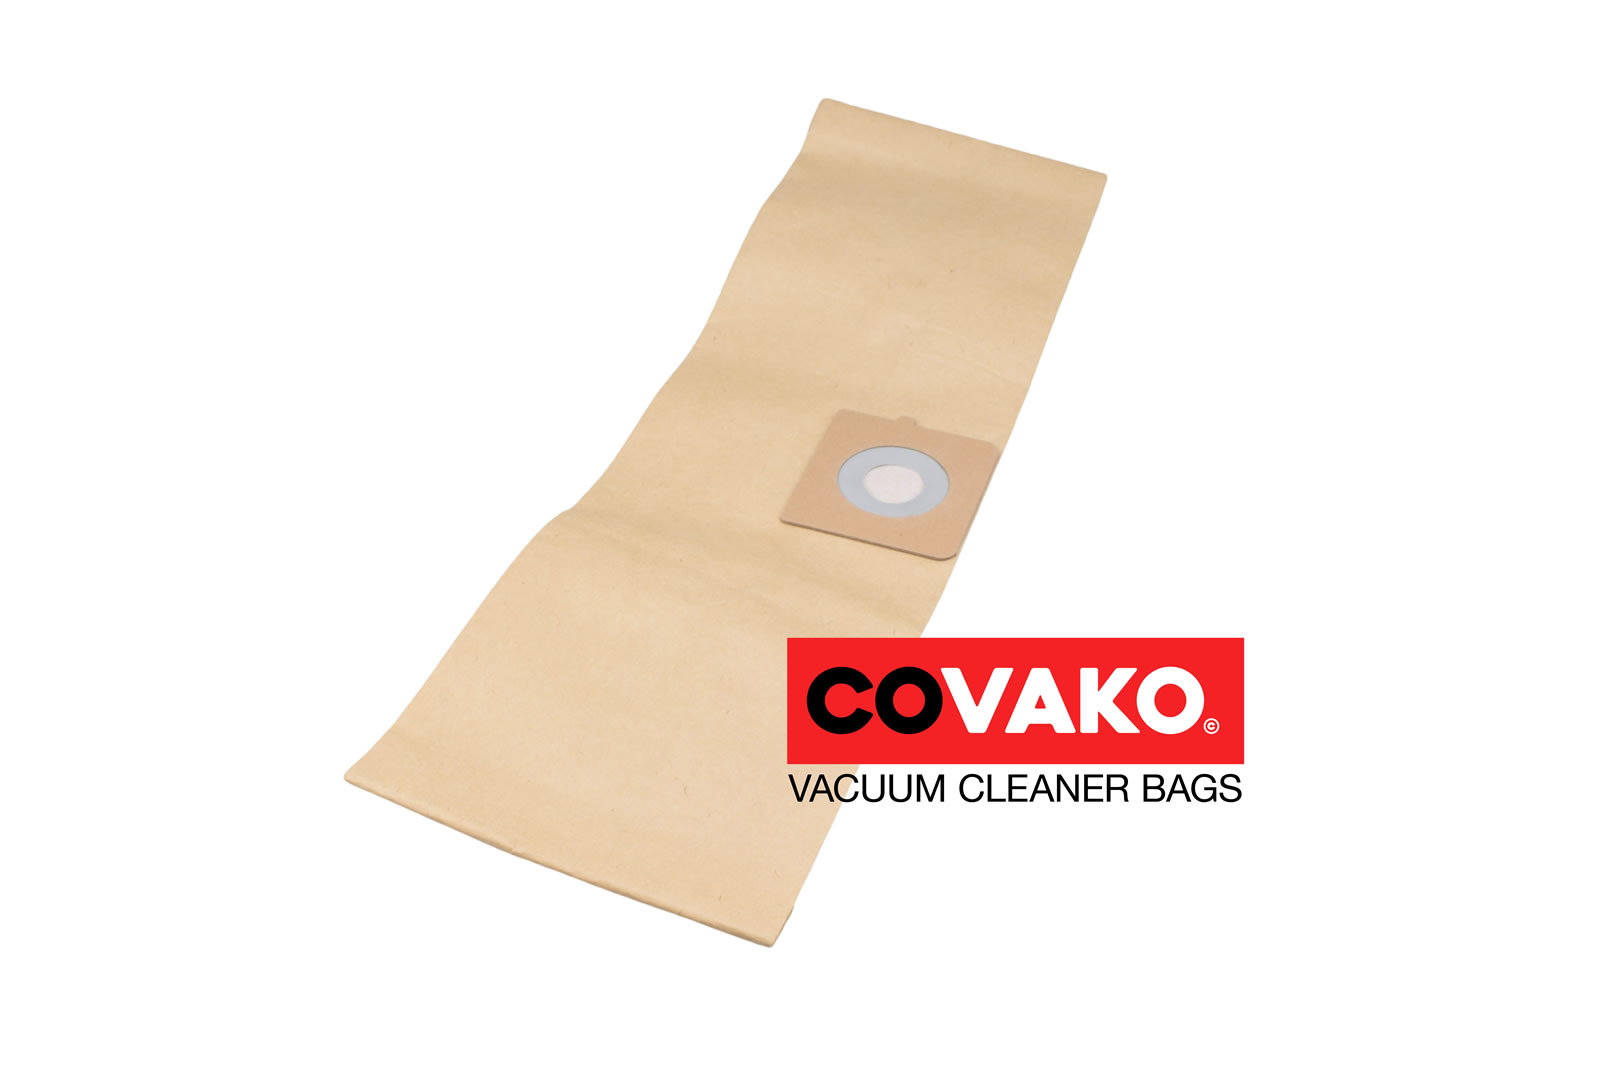 Fast Silent 15 / Paper - Fast vacuum cleaner bags